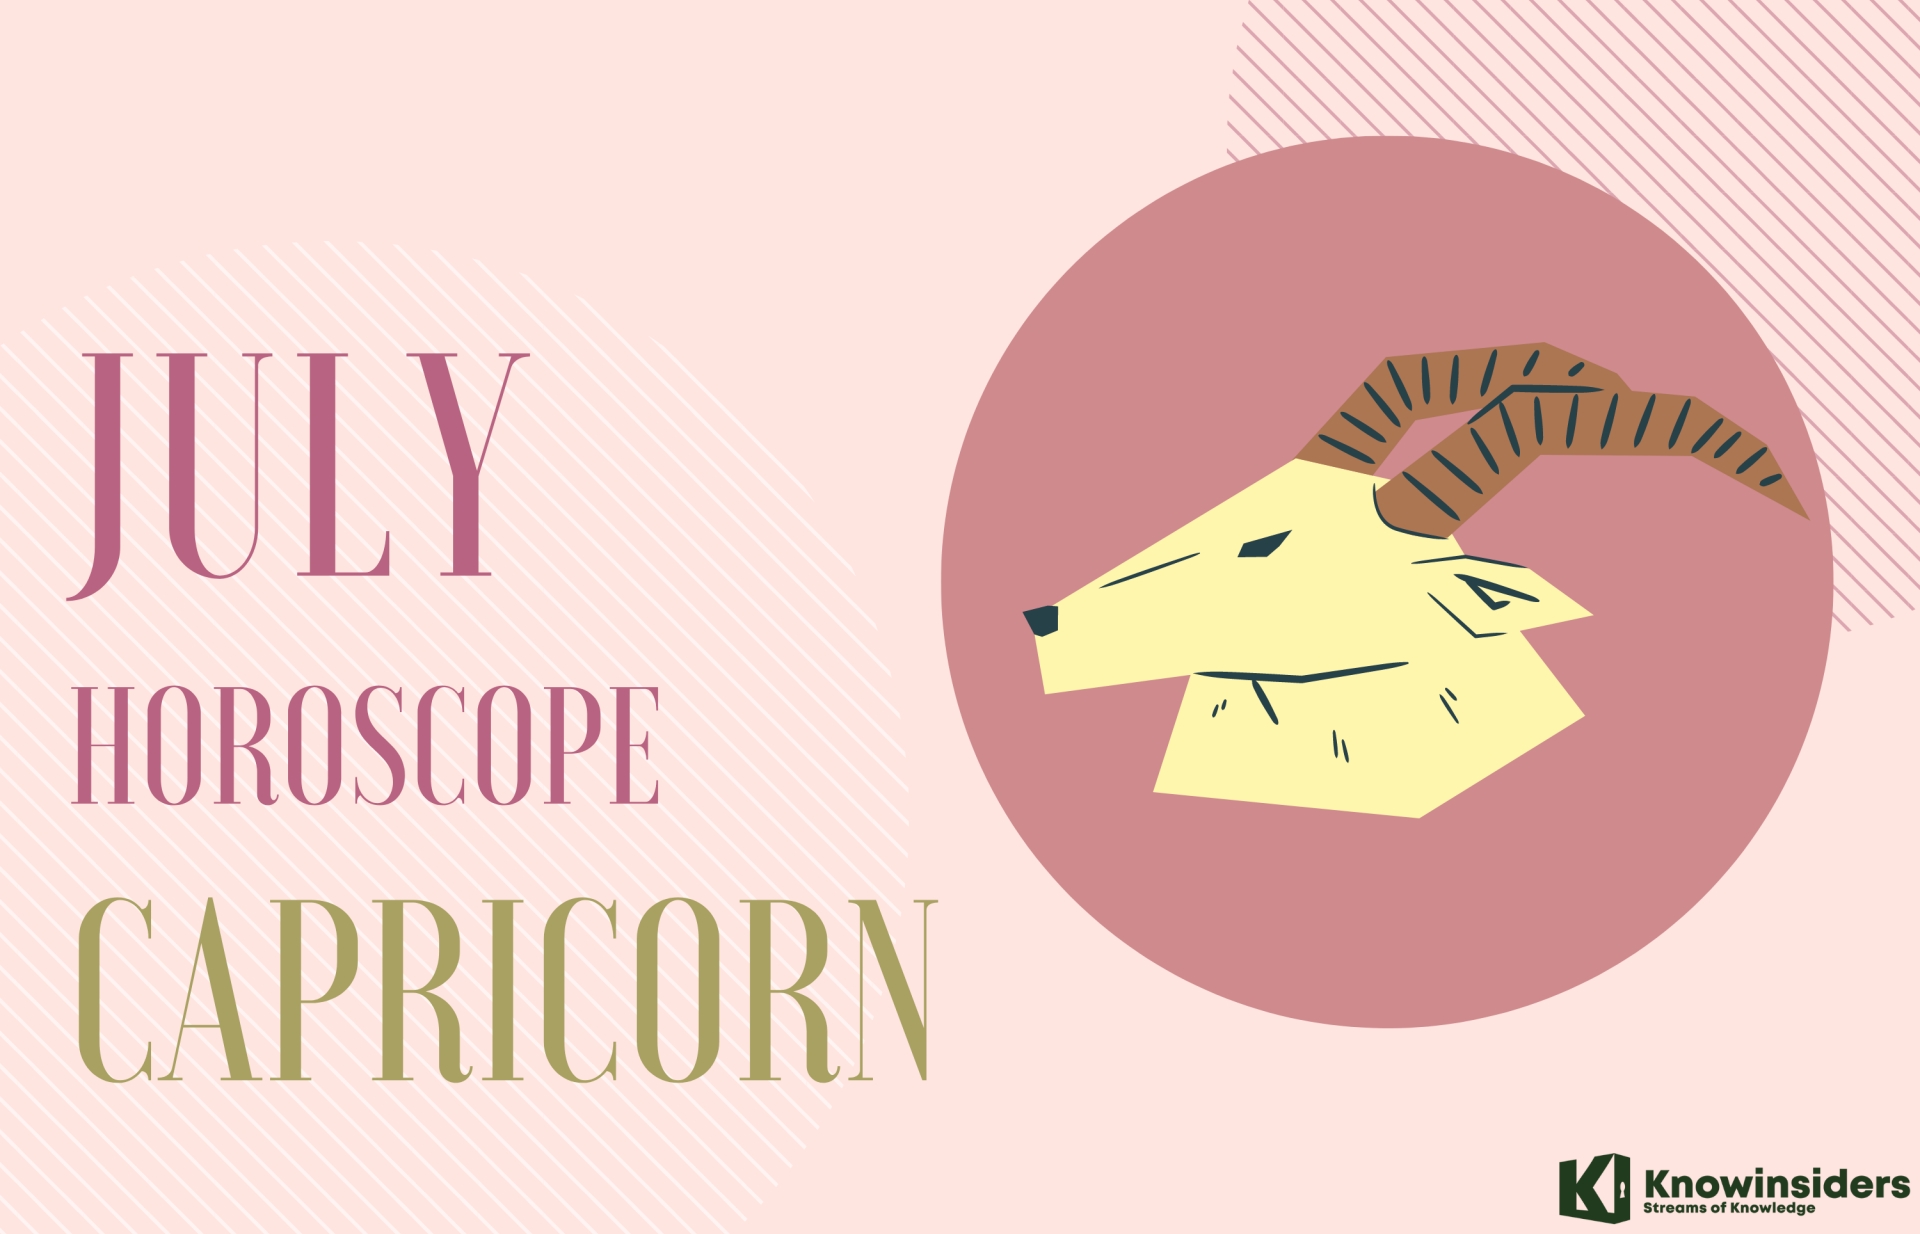 CAPRICORN July 2022 Horoscope: Monthly Prediction for Love, Career, Money and Health